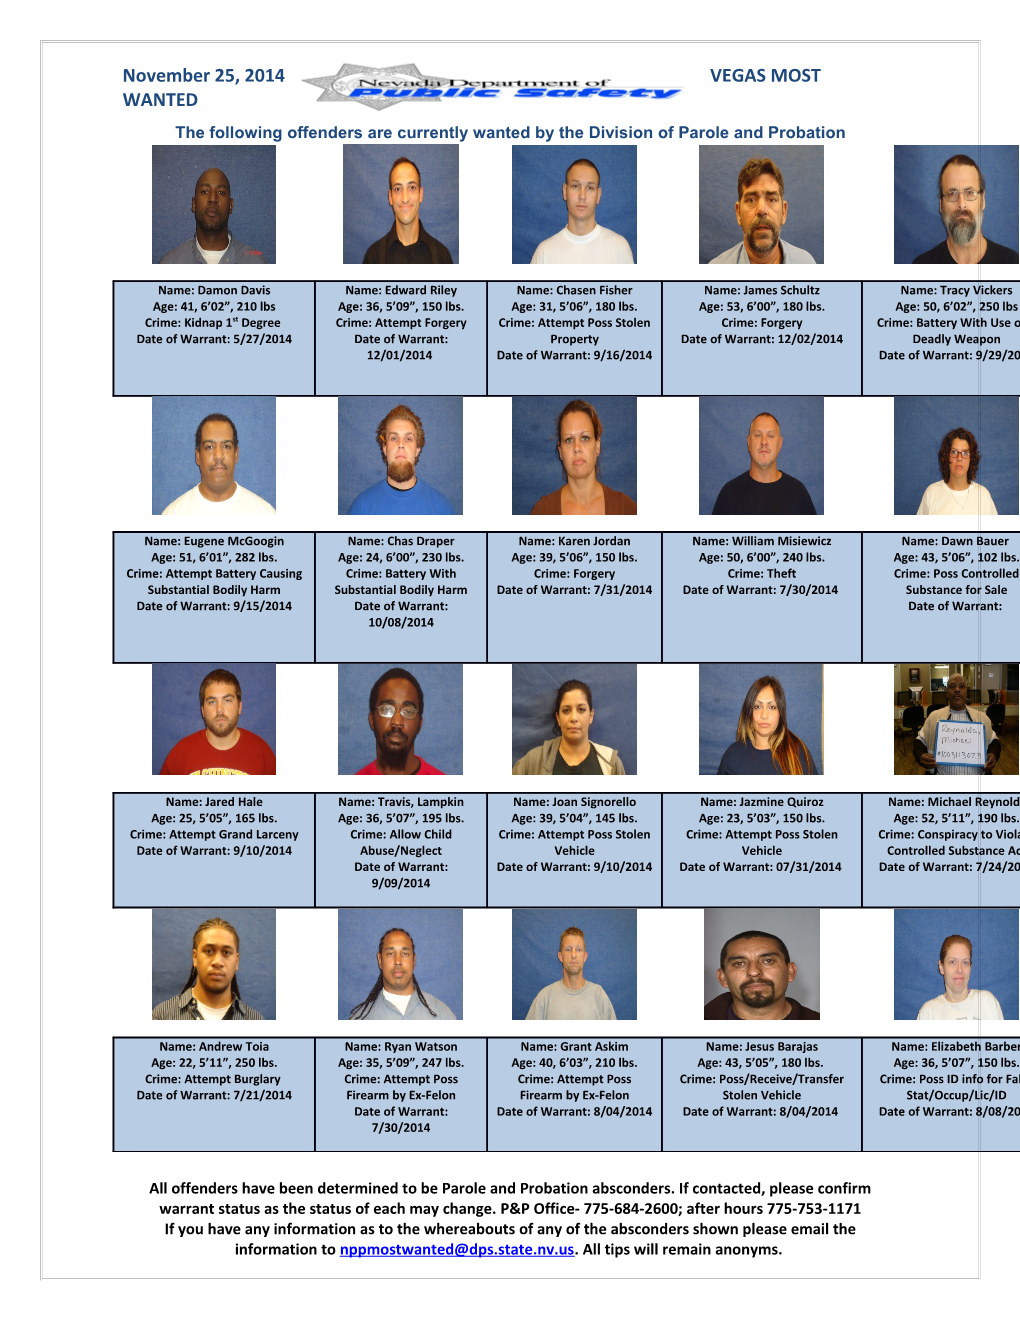 The Following Offenders Are Currently Wanted by the Division of Parole and Probation